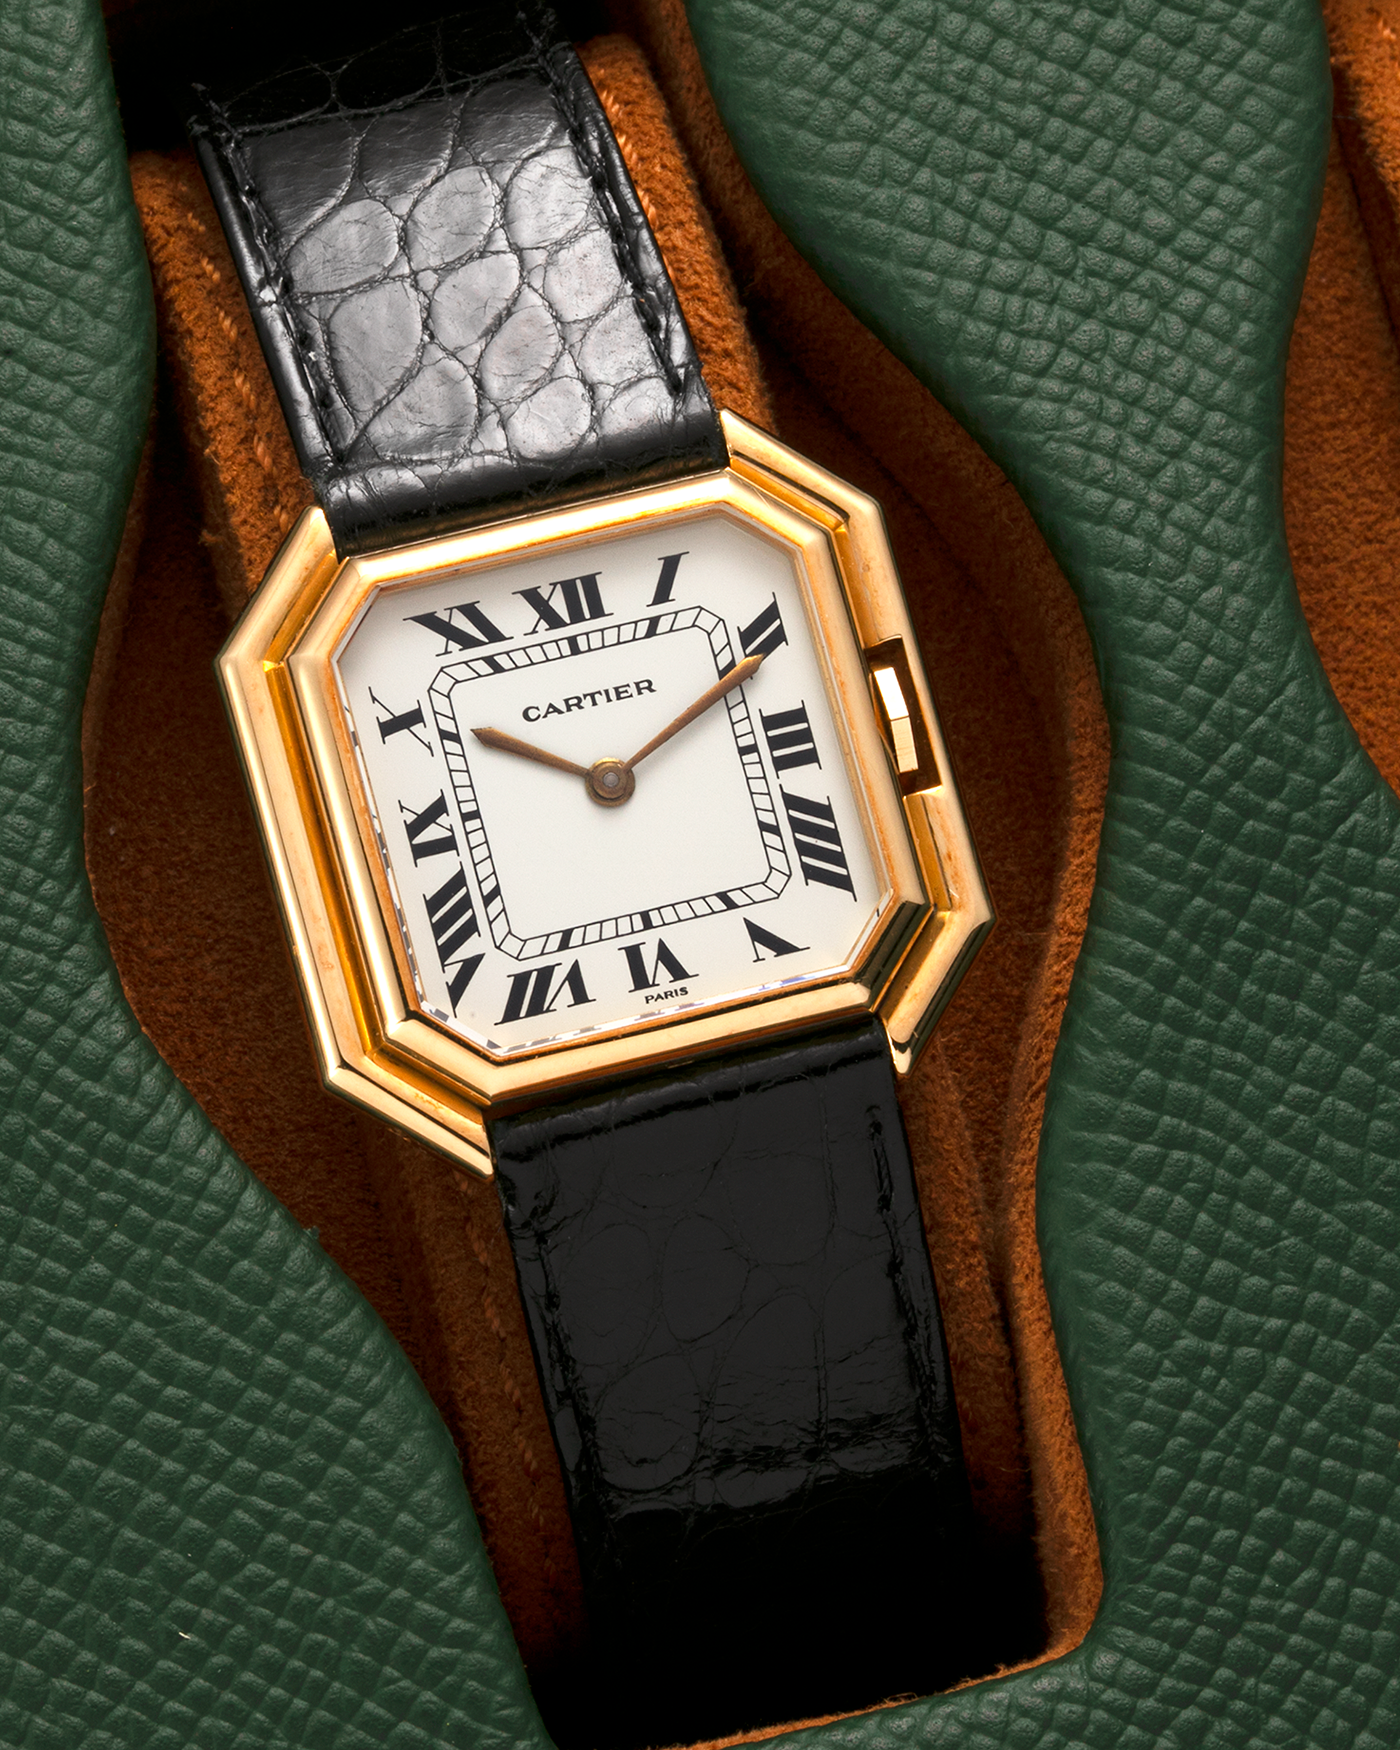 Brand: Cartier Year: 1970s Model: Ceinture ‘Jumbo’ Reference Number: AS03953 Material: 18-carat Yellow Gold Movement: Cartier Cal. 78.1. Manual-Winding Case Diameter: 31mm x 33mm Strap: Cartier Black Textured Leather Strap with Signed 18-carat Yellow Gold